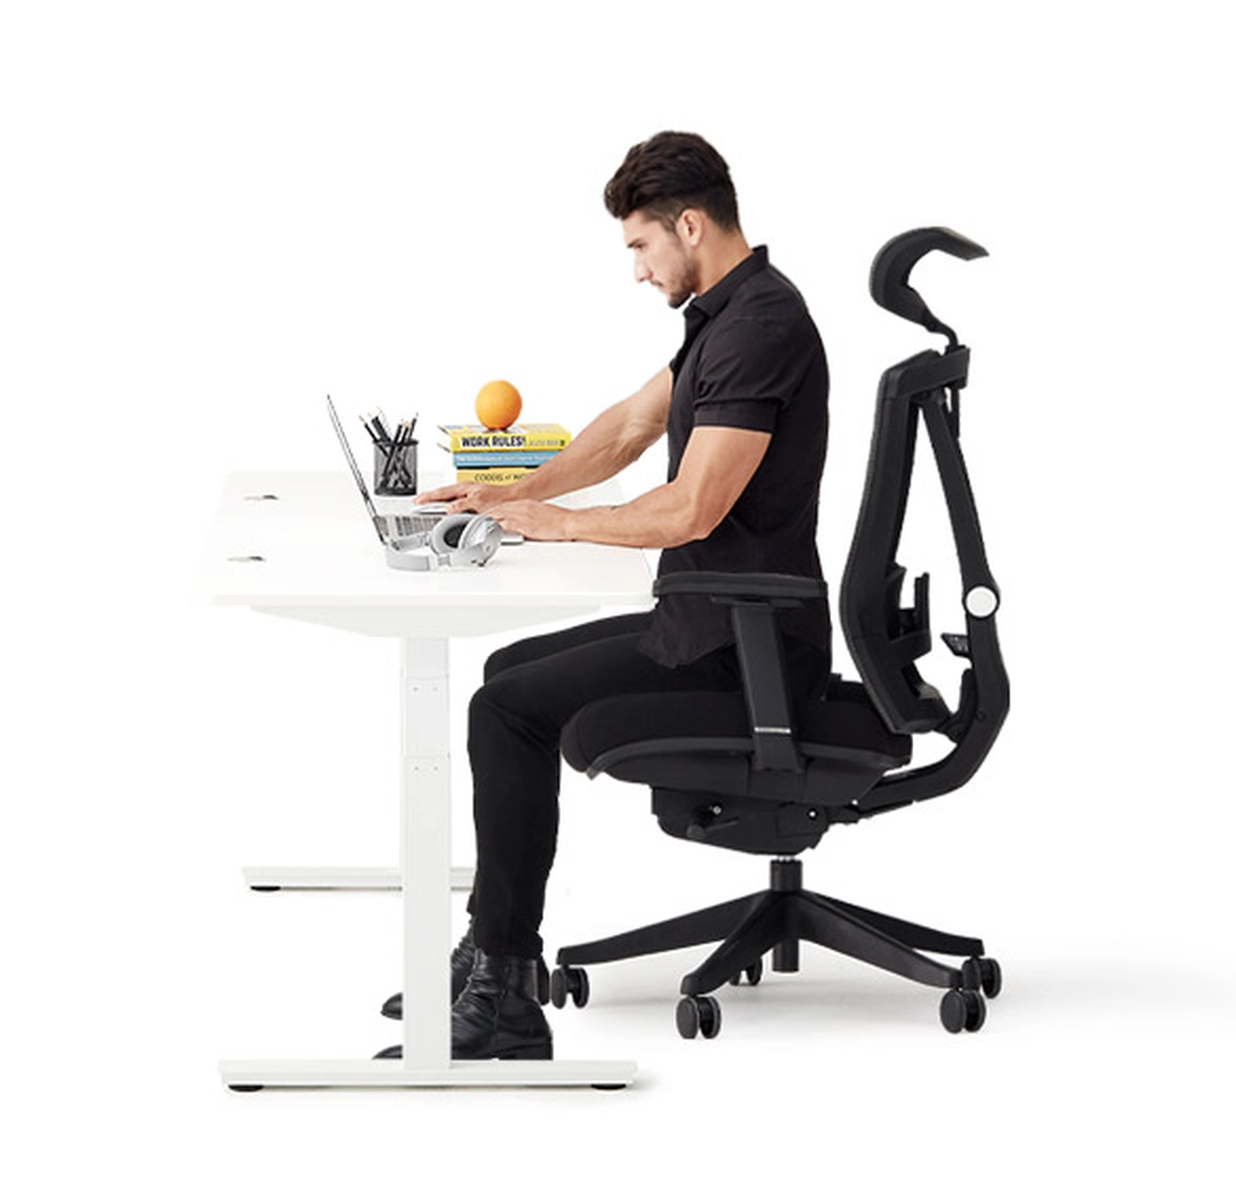 Why use a ergonomic chair?